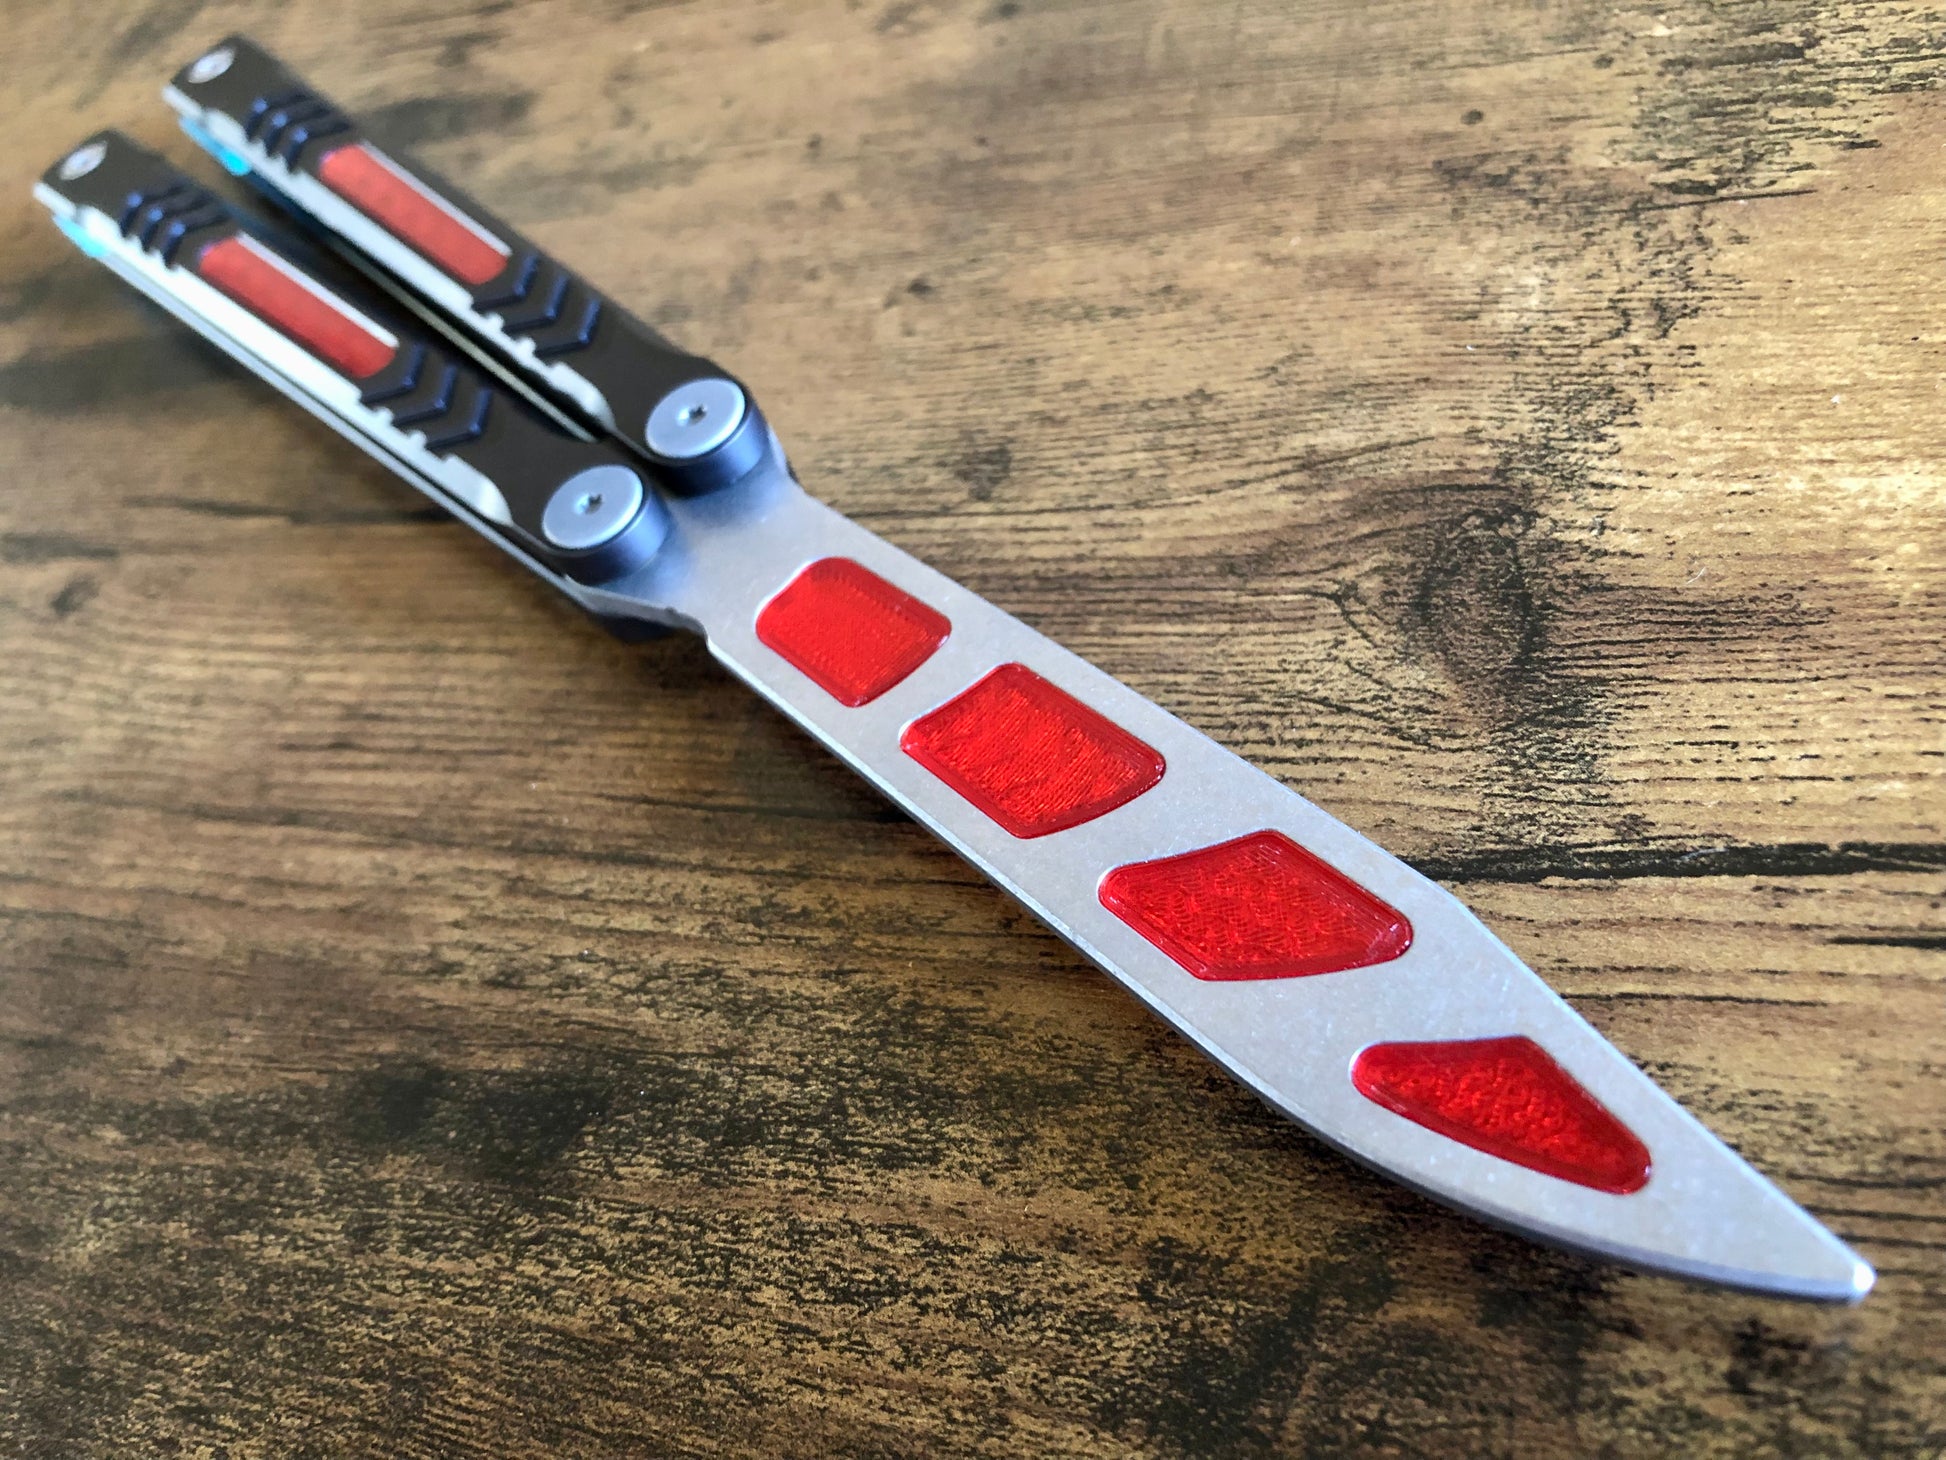 Modify the balance of your Revo Nexus balisong trainer with this custom-made Zippy balance mod. These inserts add blade weight for a more neutral balance profile. The inserts are made from a shatter-proof polyurethane and won't fall out on drops.